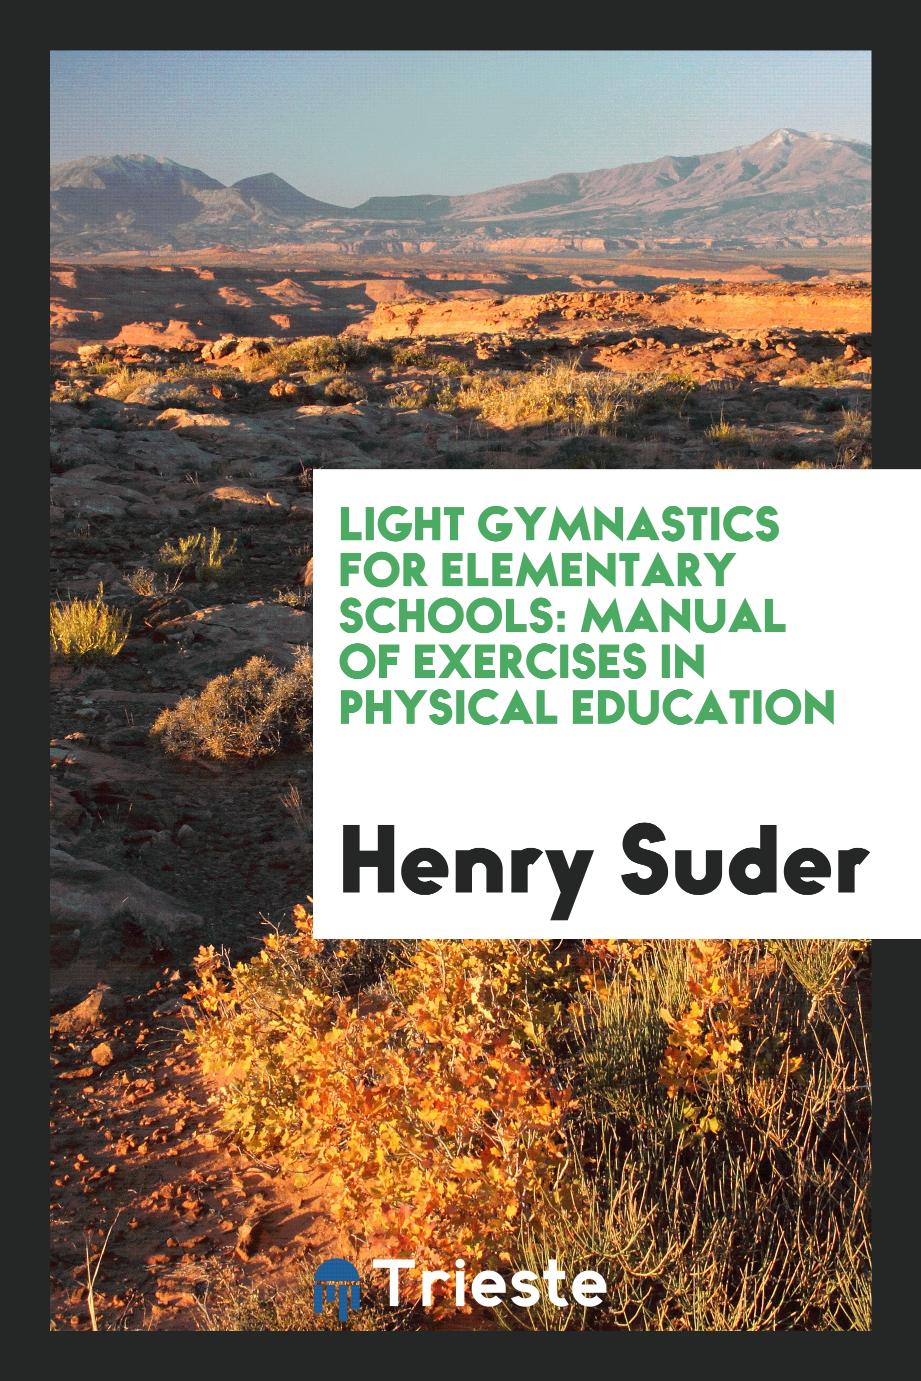 Light gymnastics for elementary schools: manual of exercises in physical education